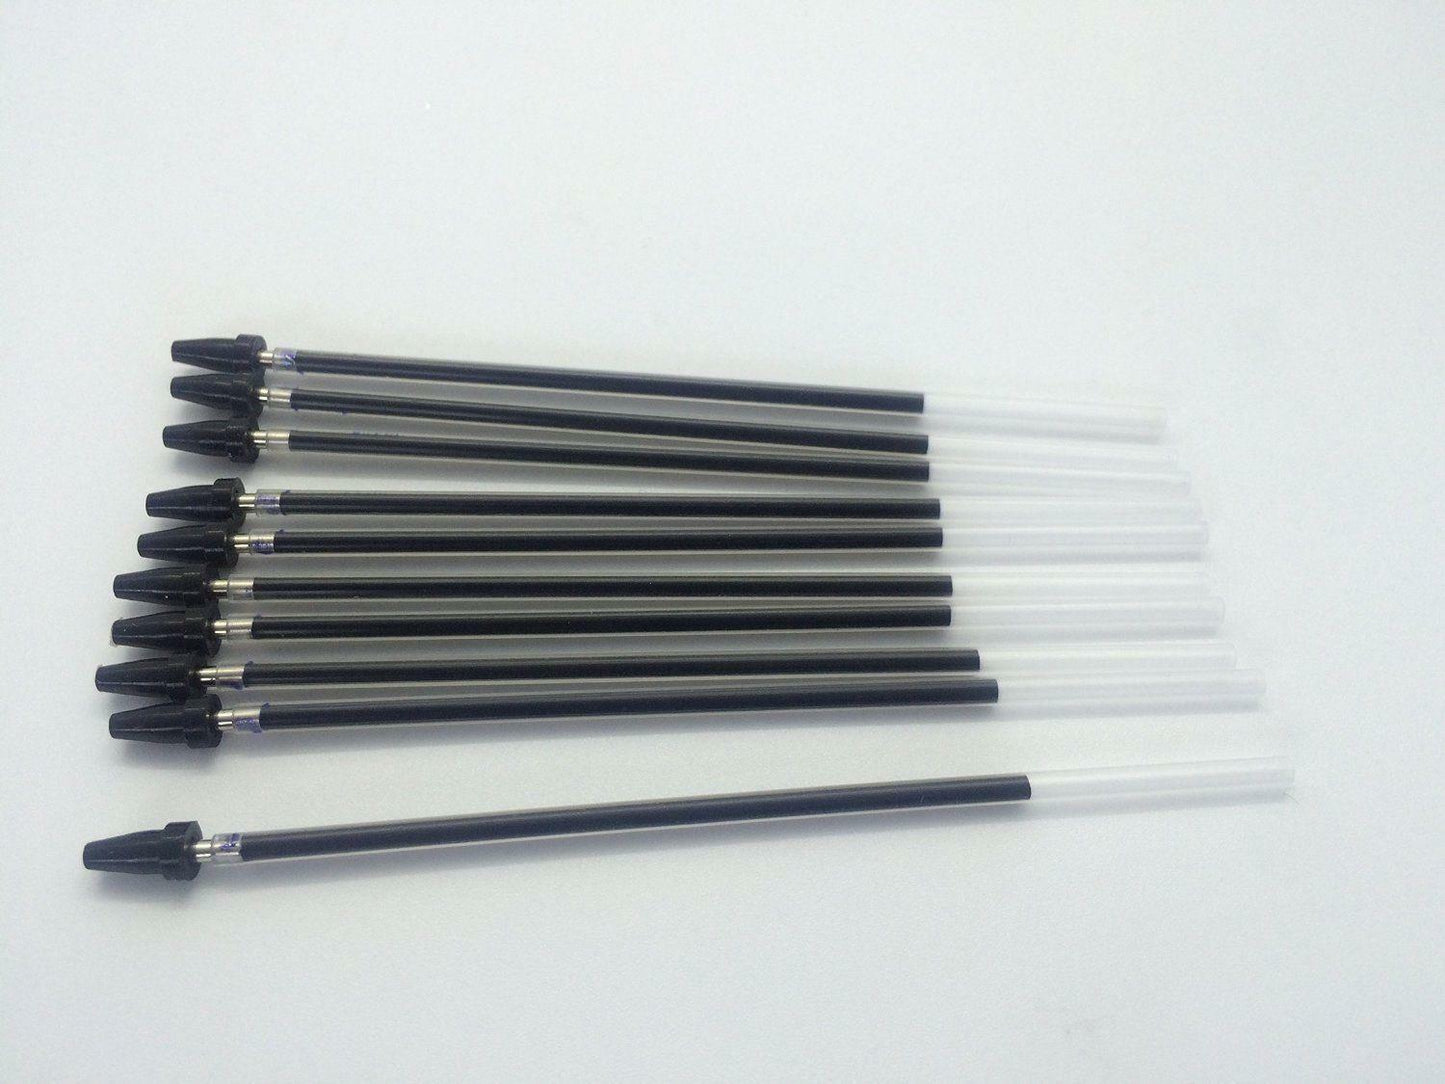 Pack of 10 Black Ink Ballpoint Pen Refills by Janrax